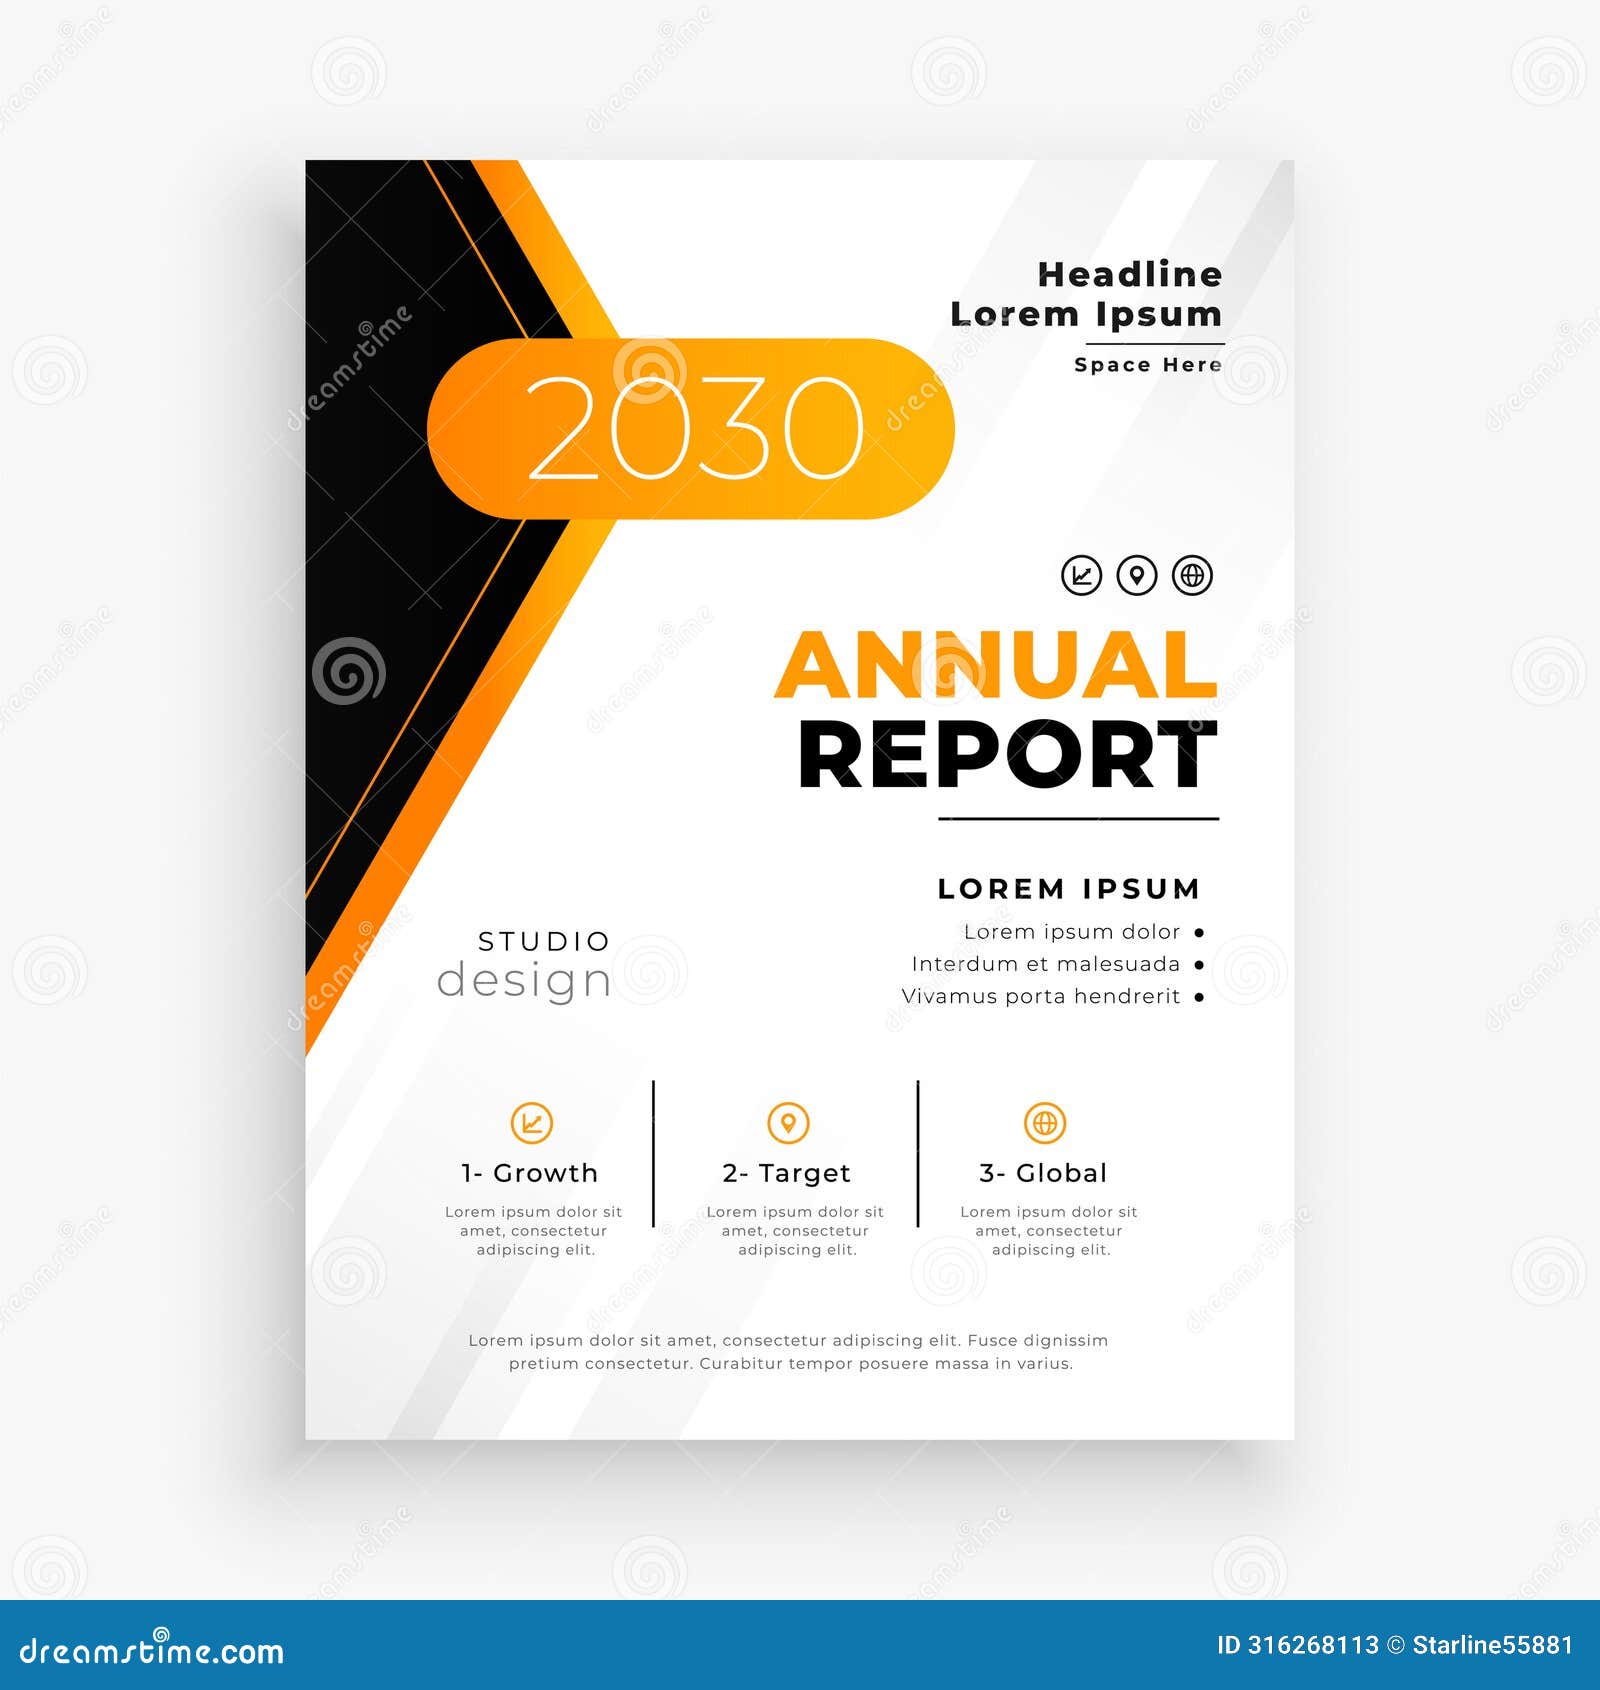 corporate annual report layout showcase yearly data with style